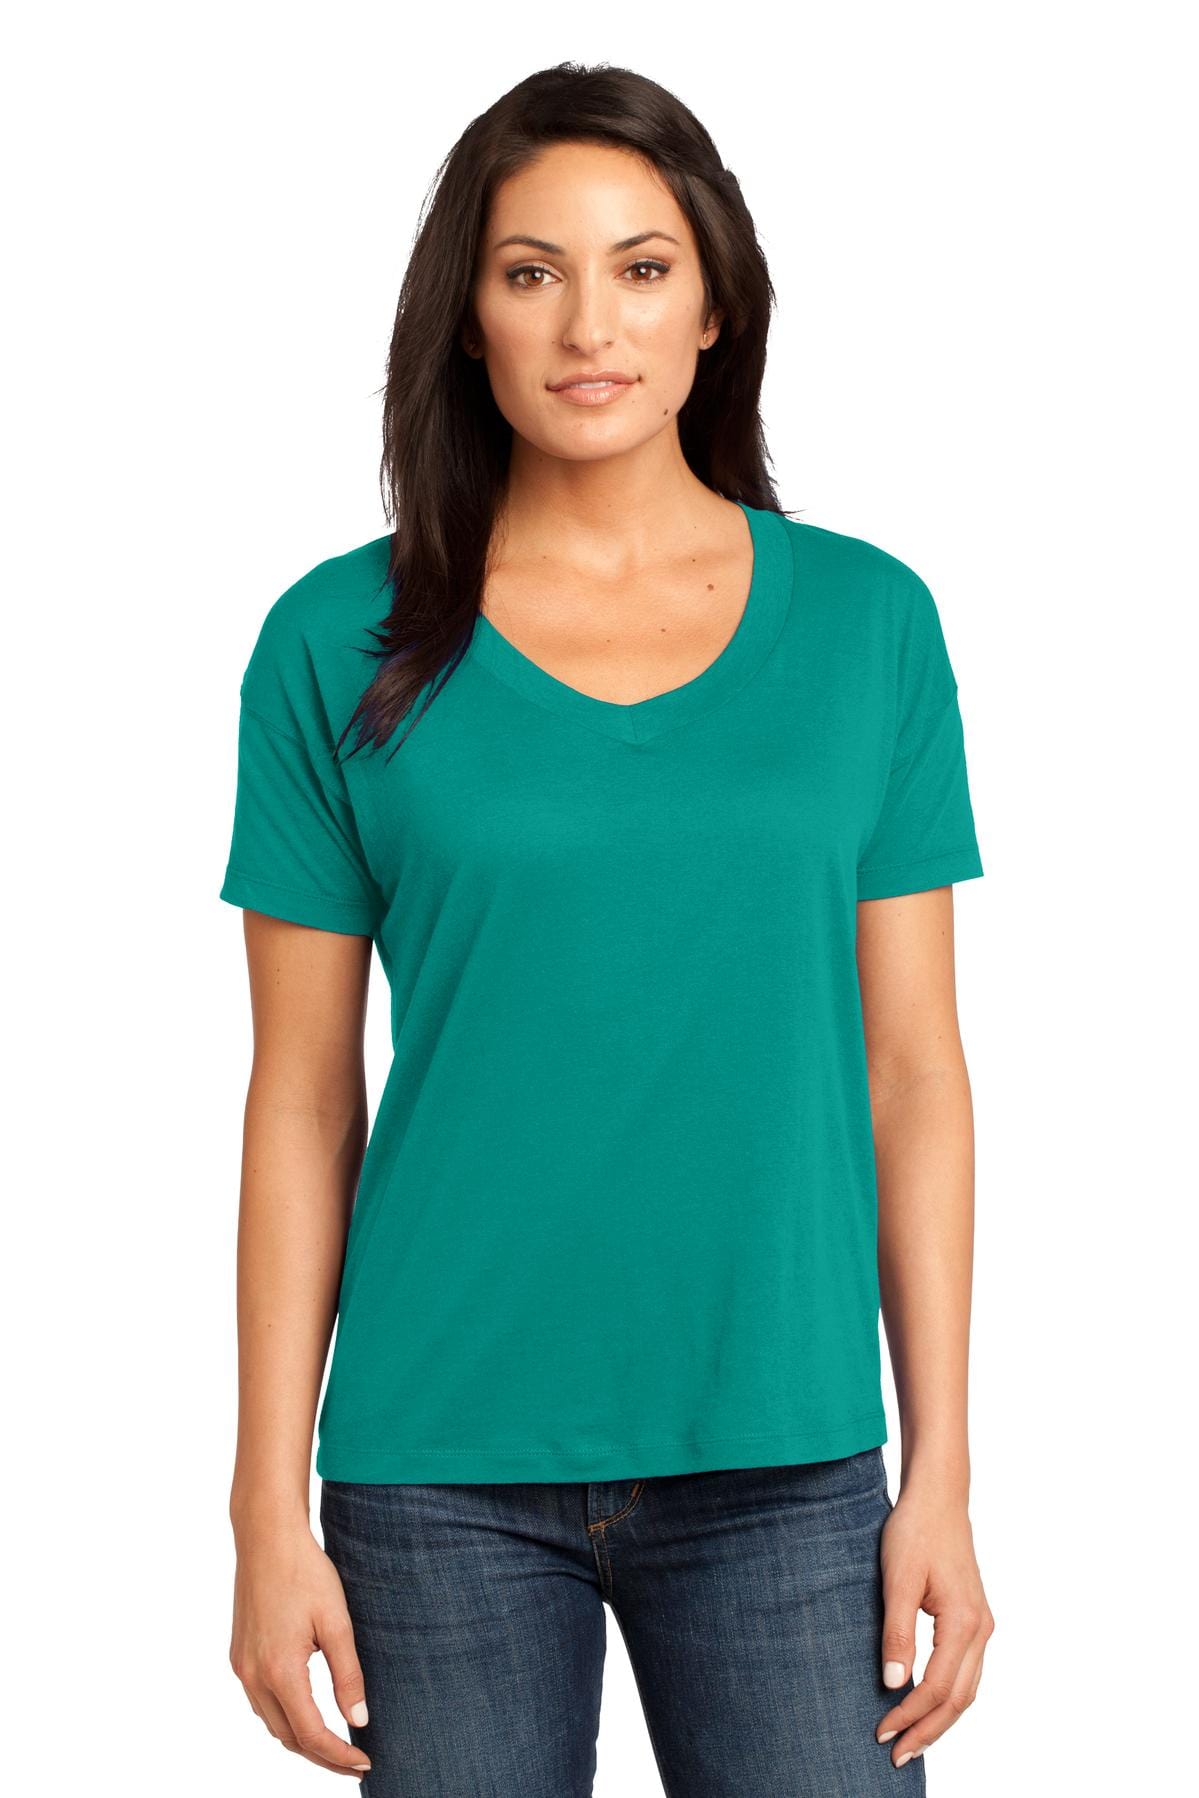 DISCONTINUED District Made ® - Ladies Modal Blend Relaxed V-Neck Tee. DM480